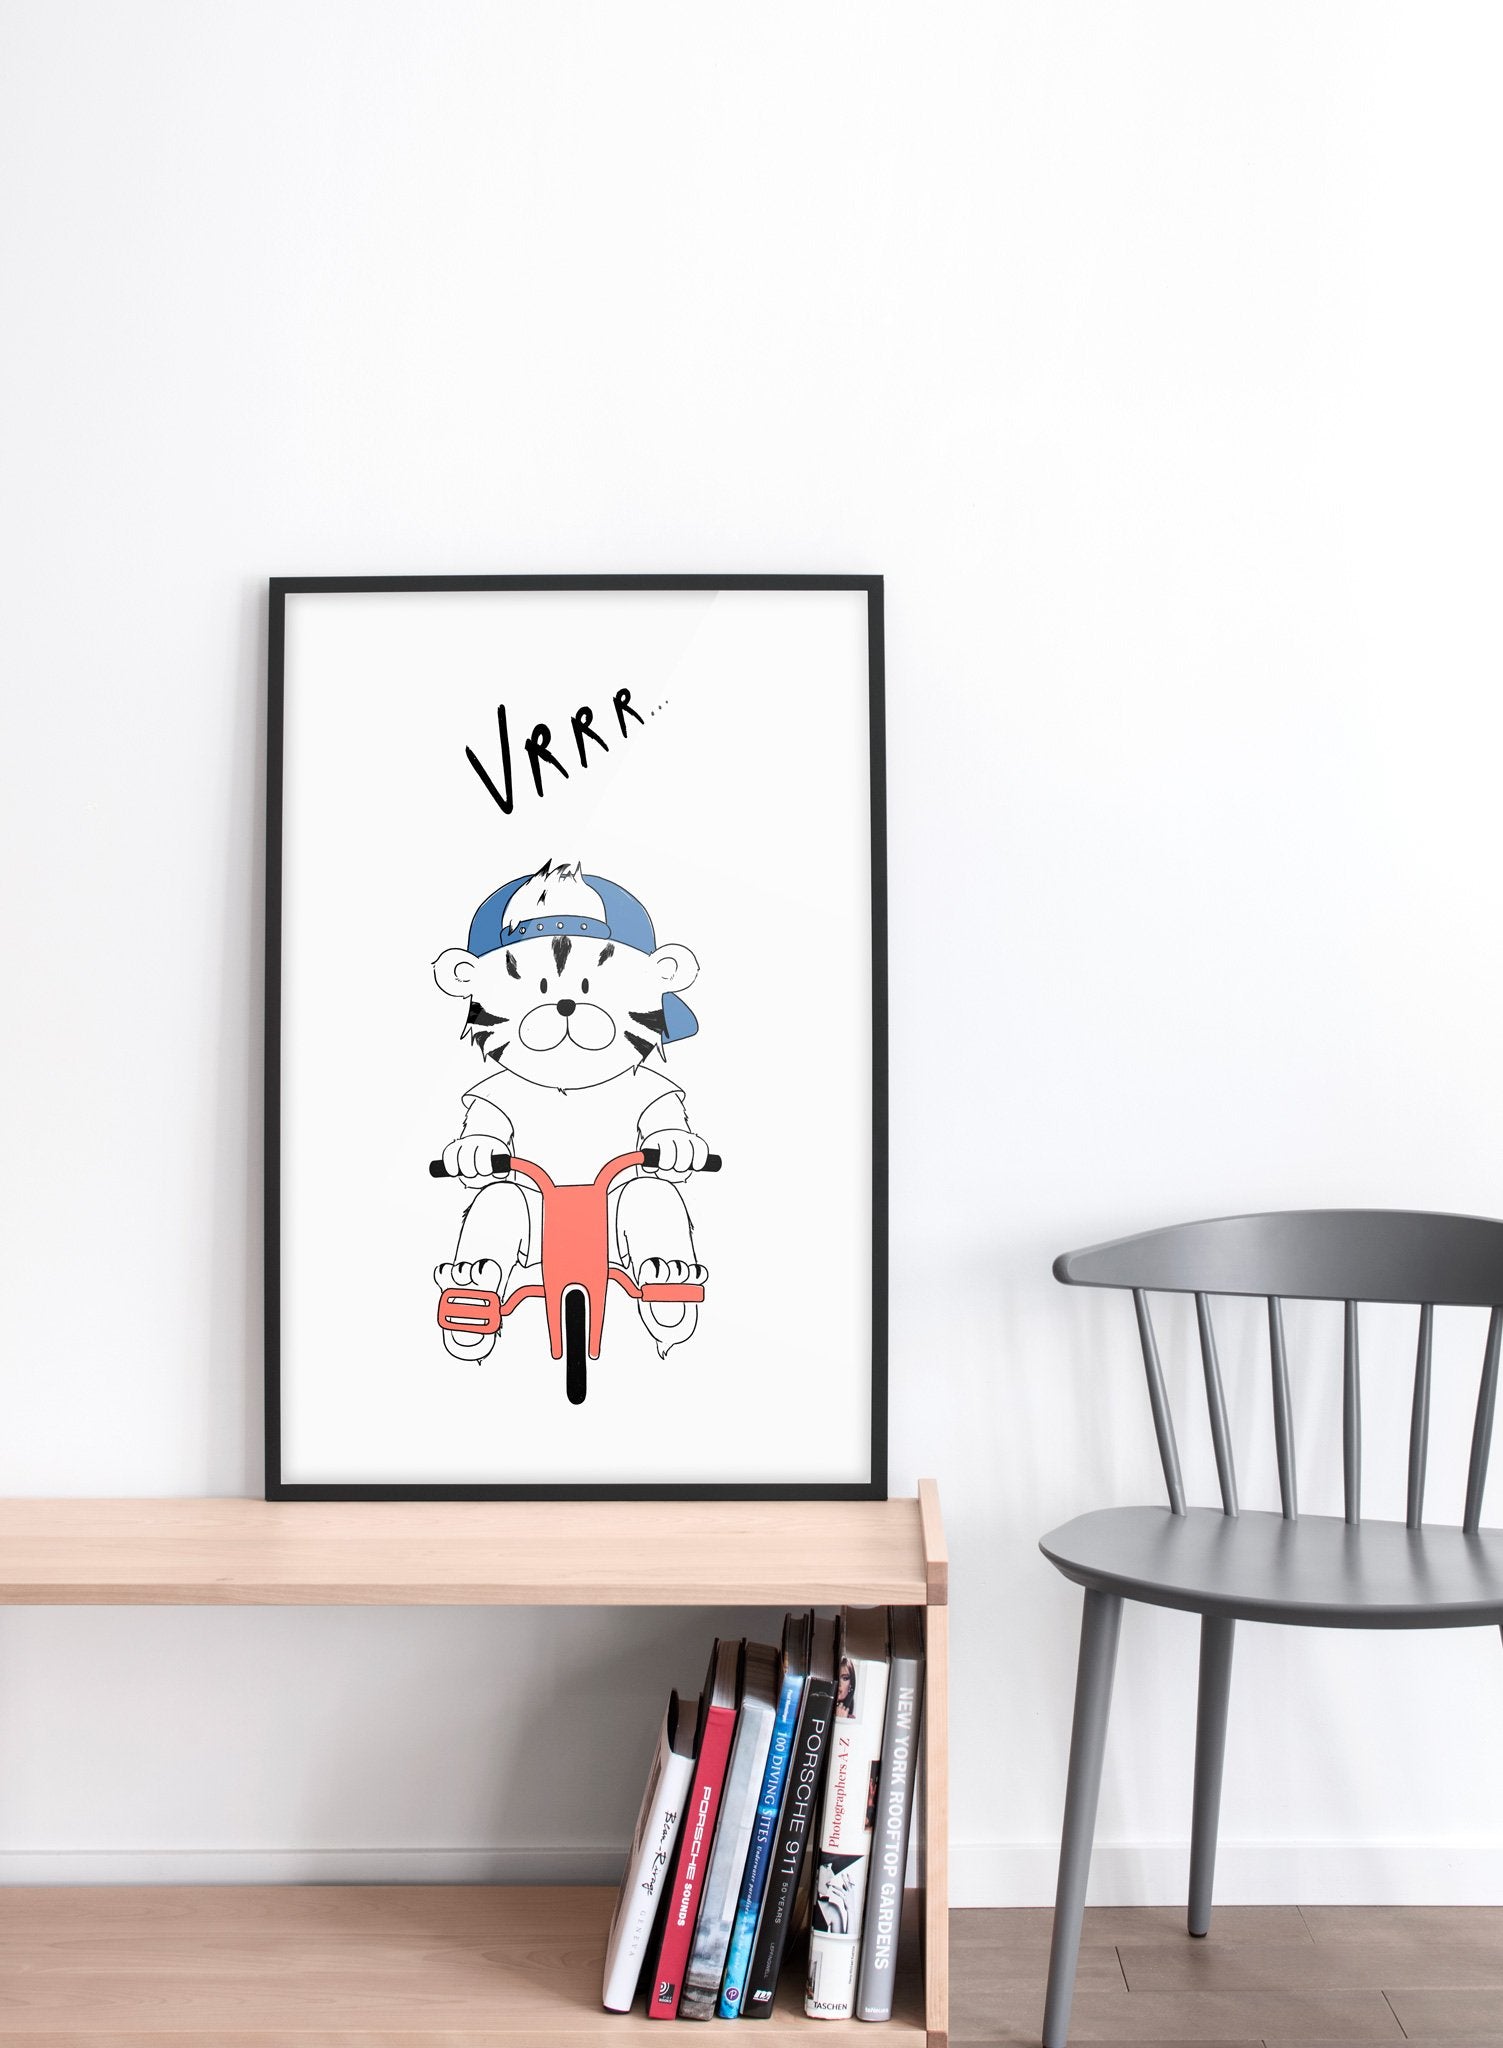 Modern minimalist poster by Opposite Wall with an illustration of a tigre - kids collection